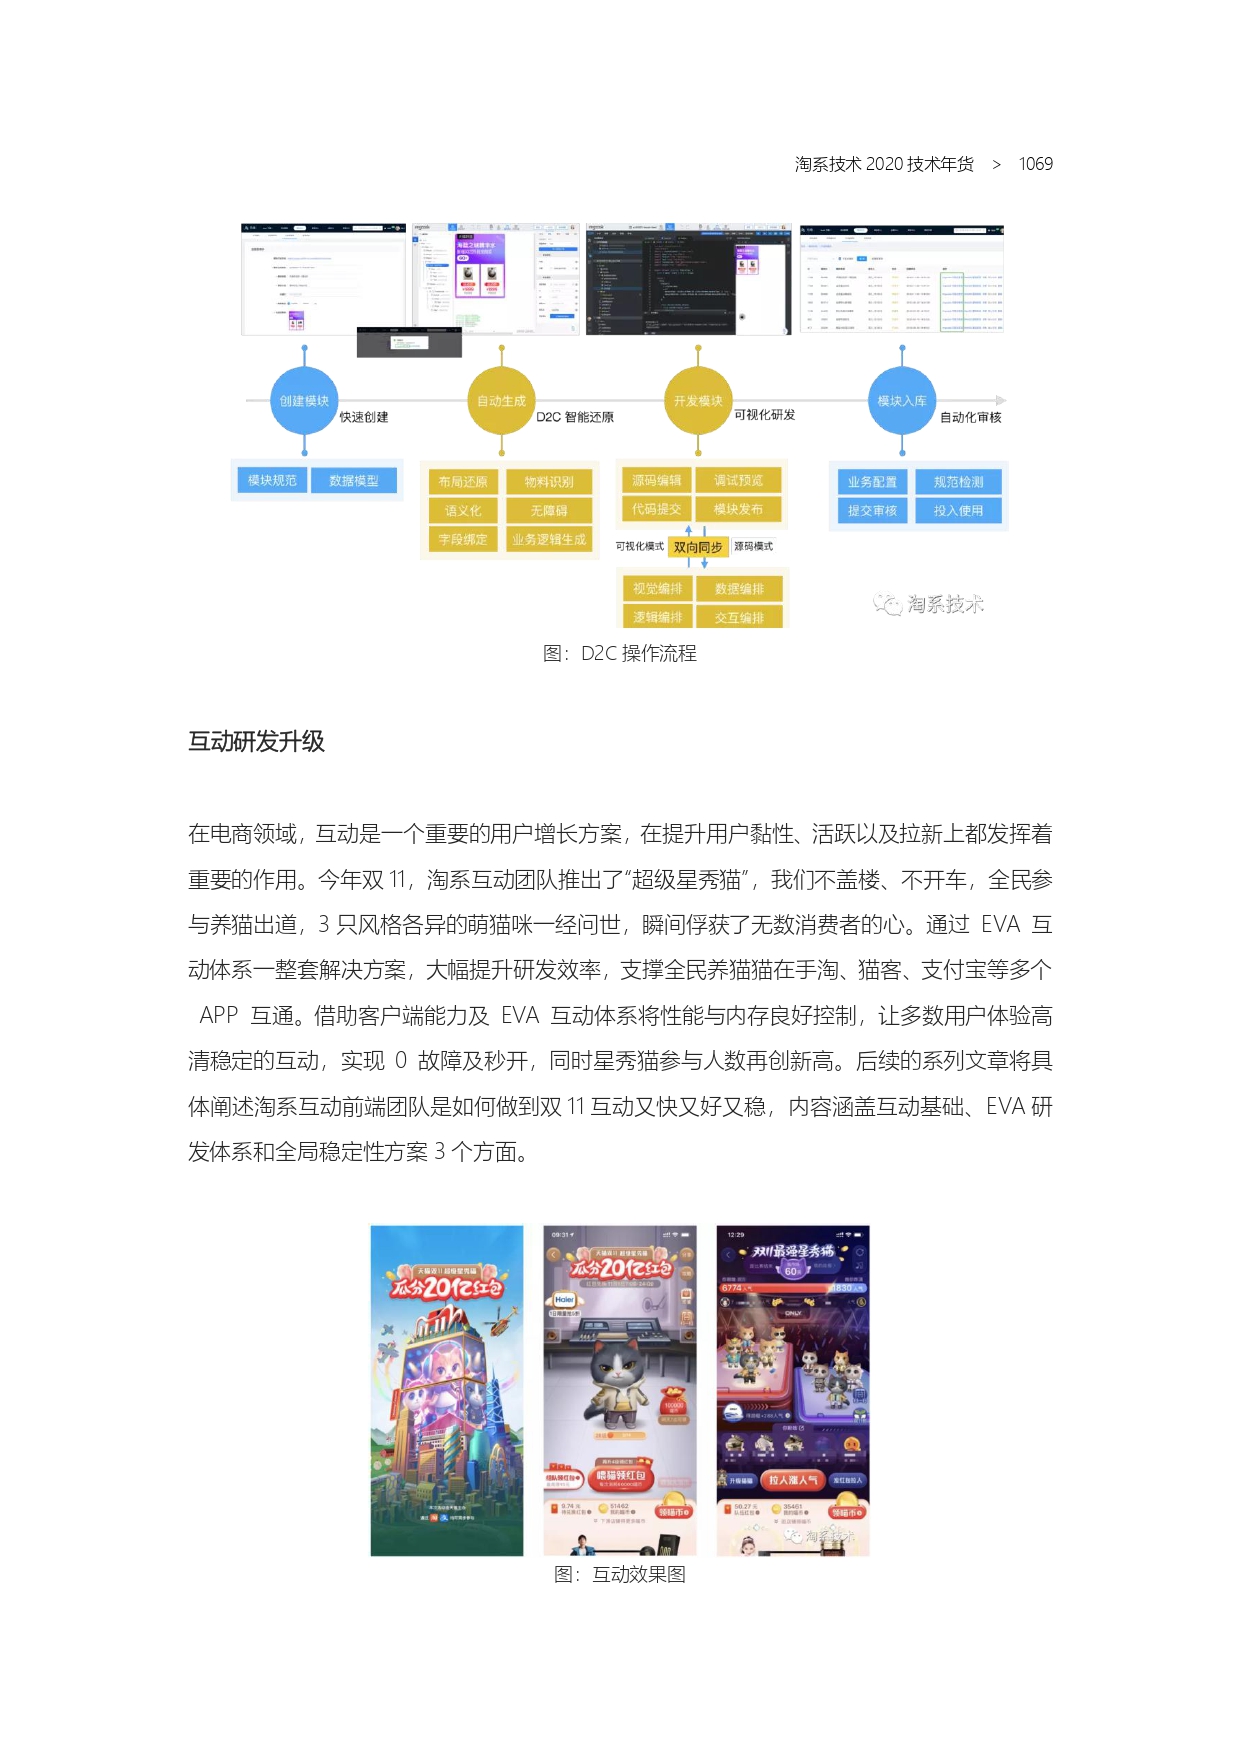 The Complete Works of Tao Technology 2020-571-1189-301-619_page-0199.jpg